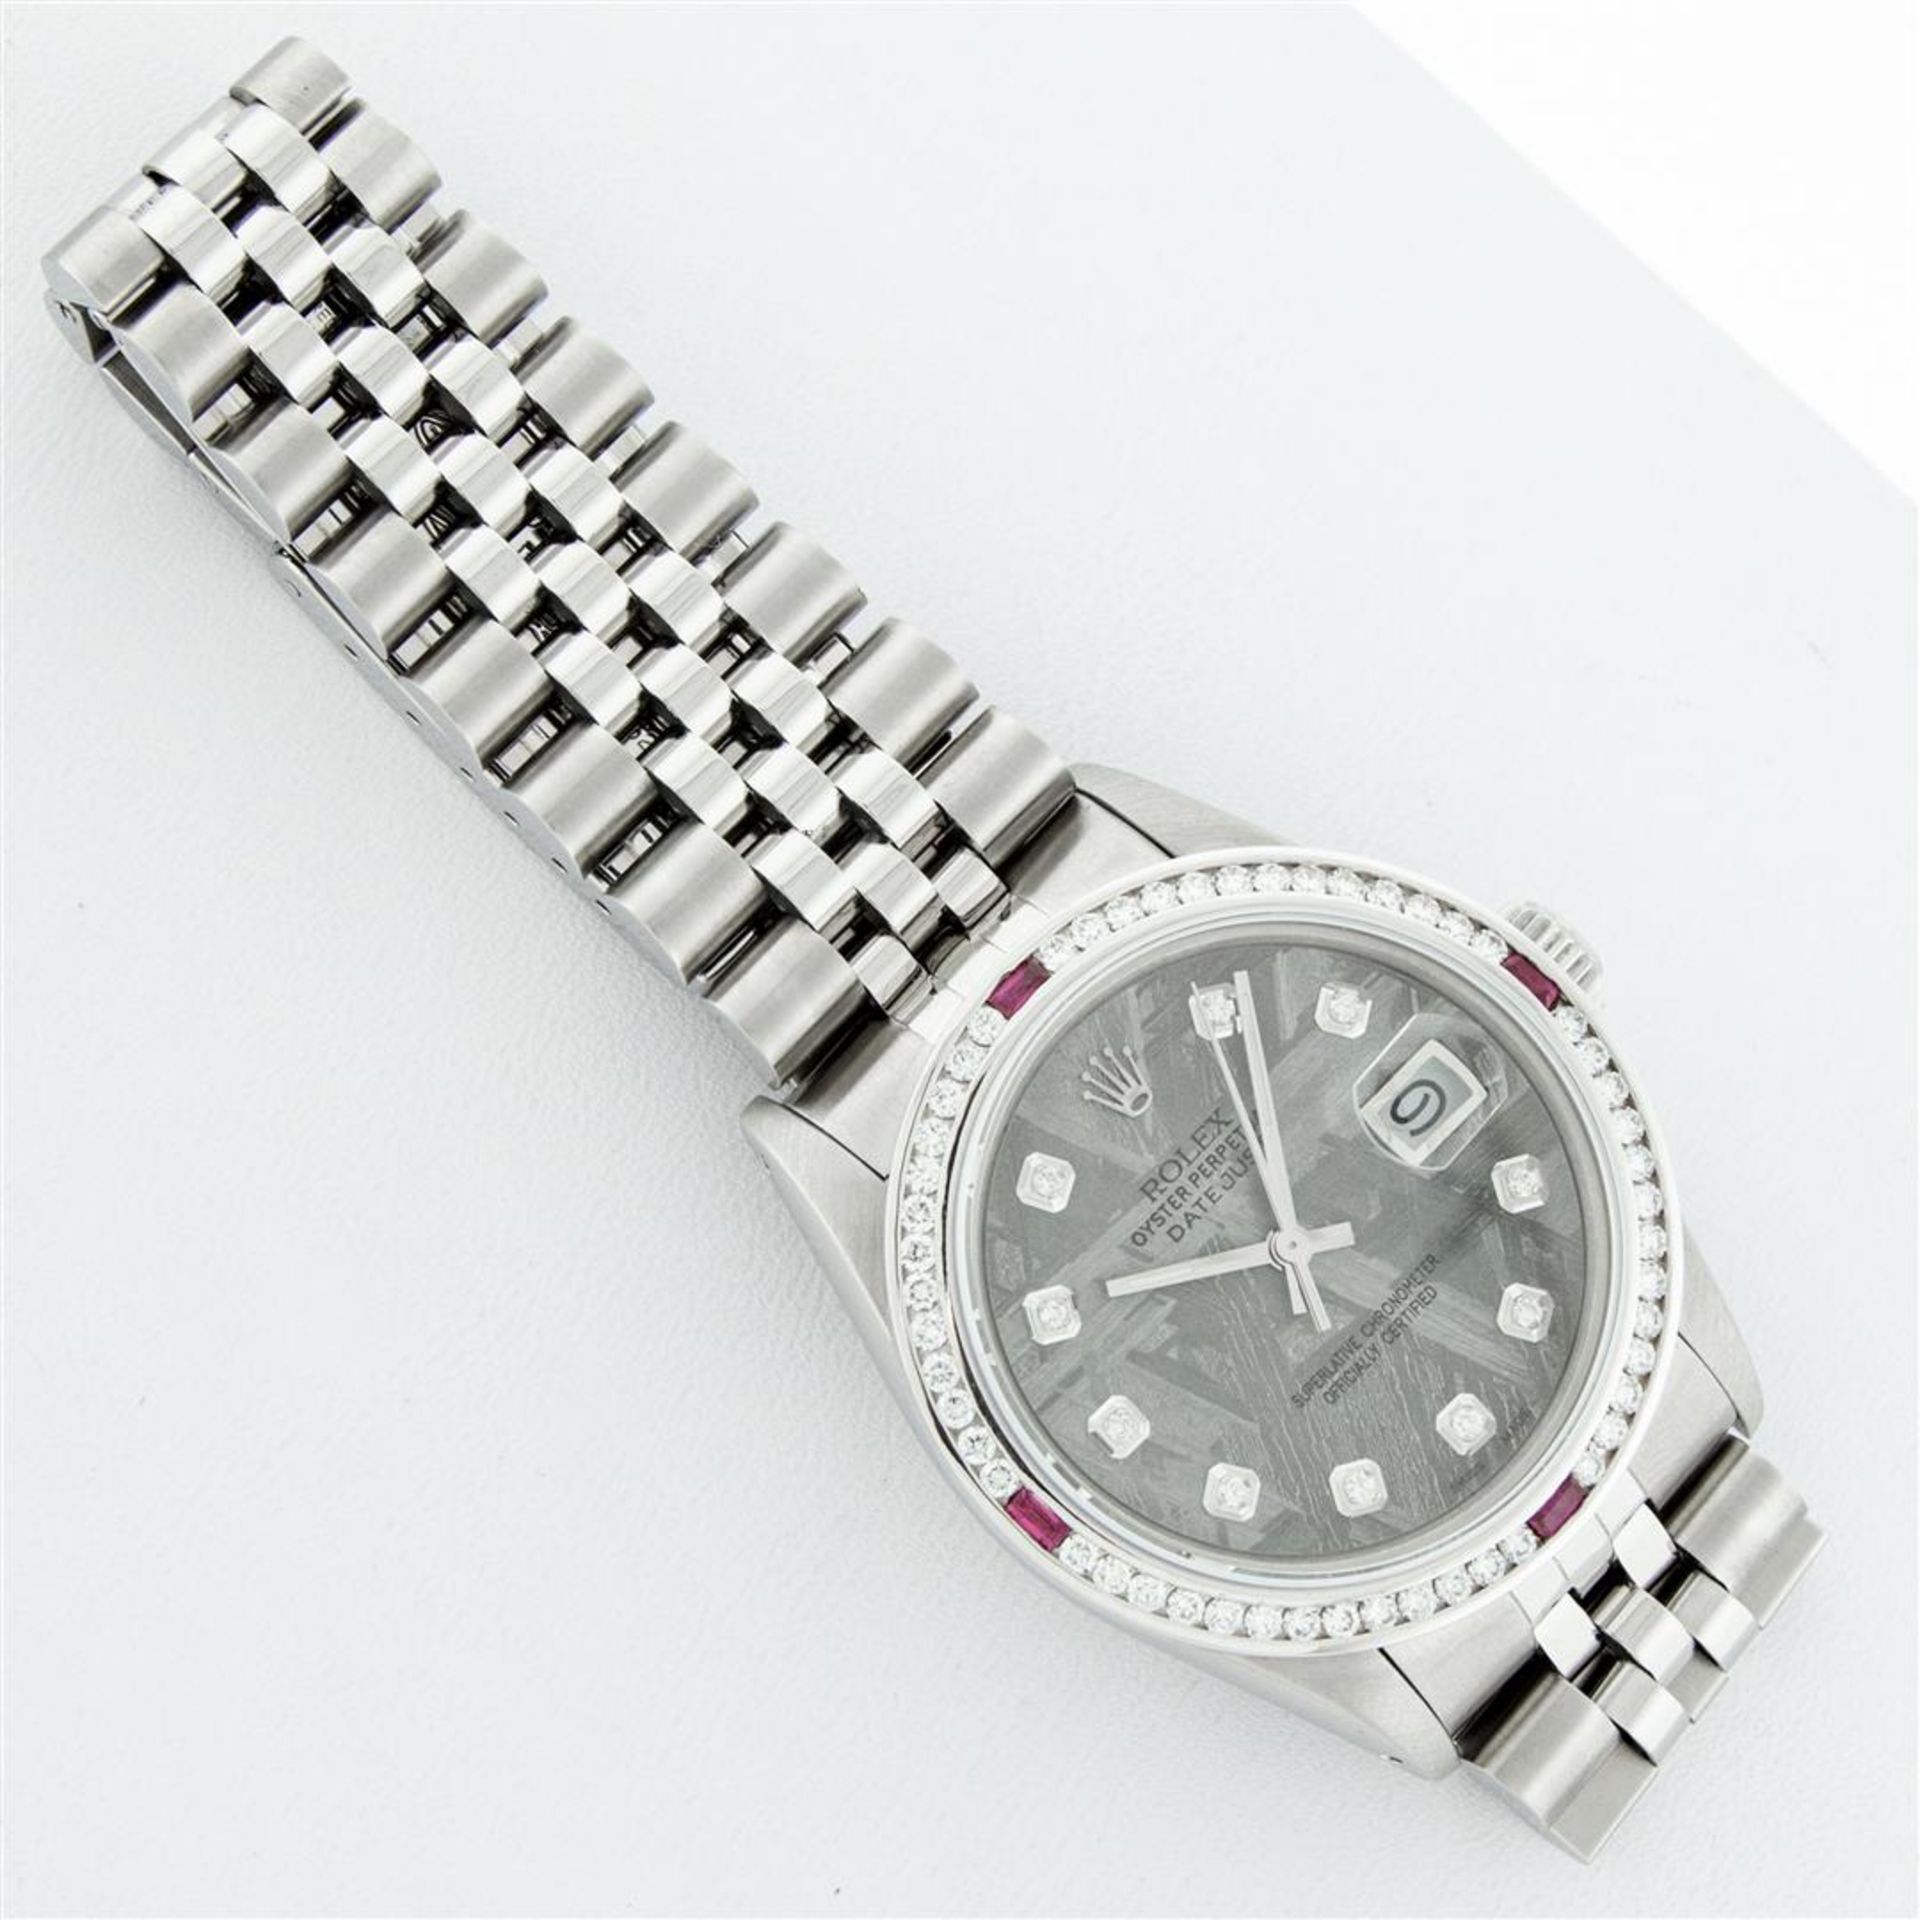 Rolex Mens SS Meteorite Diamond & Ruby Channel Set Oyster Perpetual Datejust Wri - Image 6 of 9